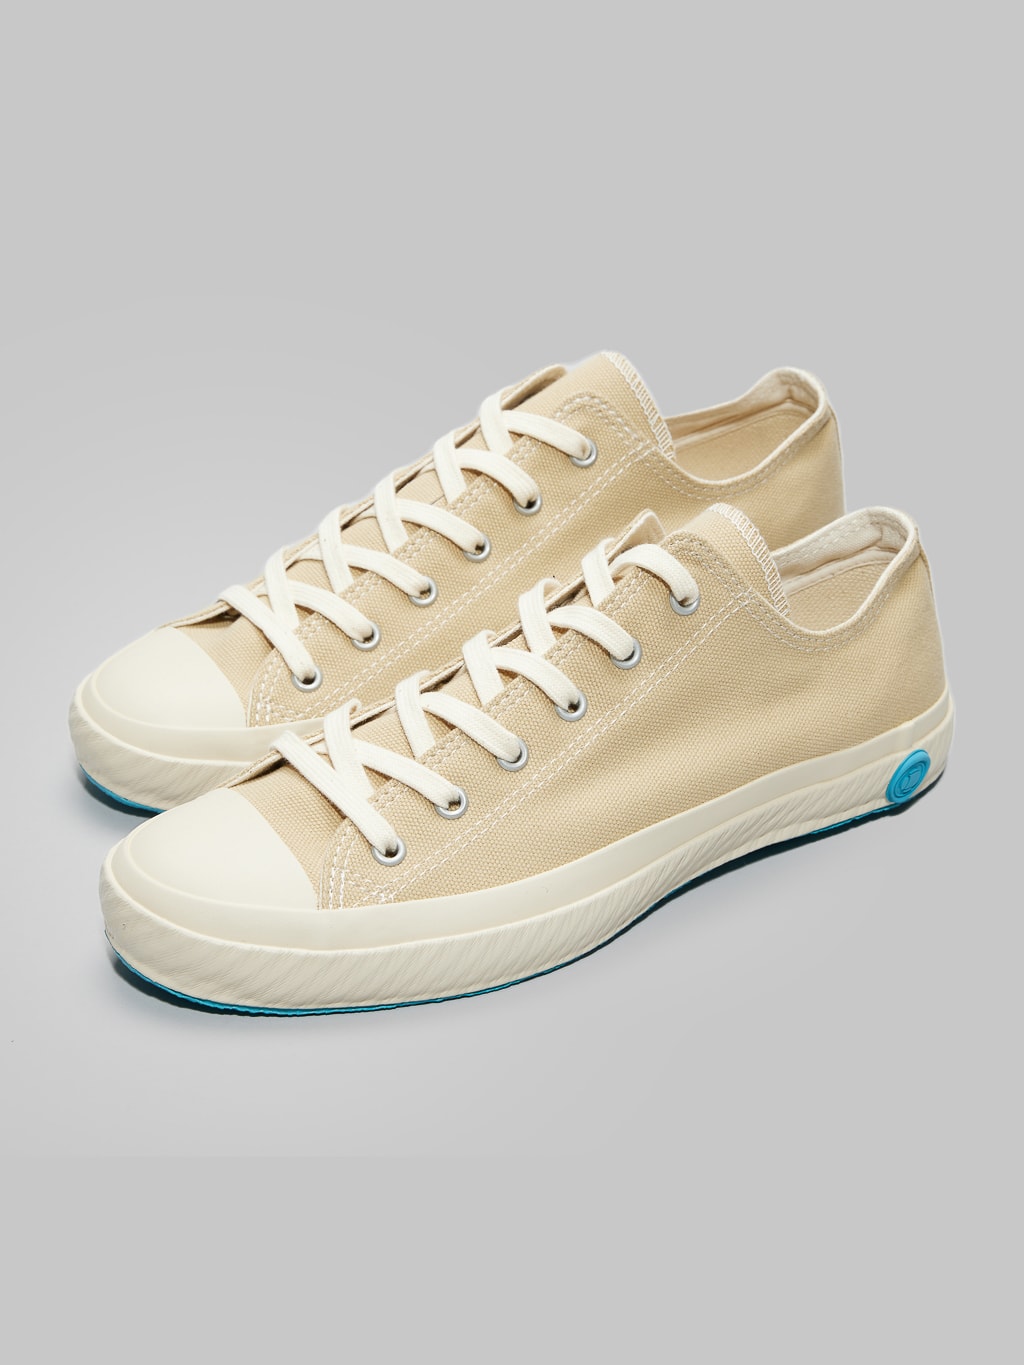 Shoes like pottery low beige sneakers made in japan